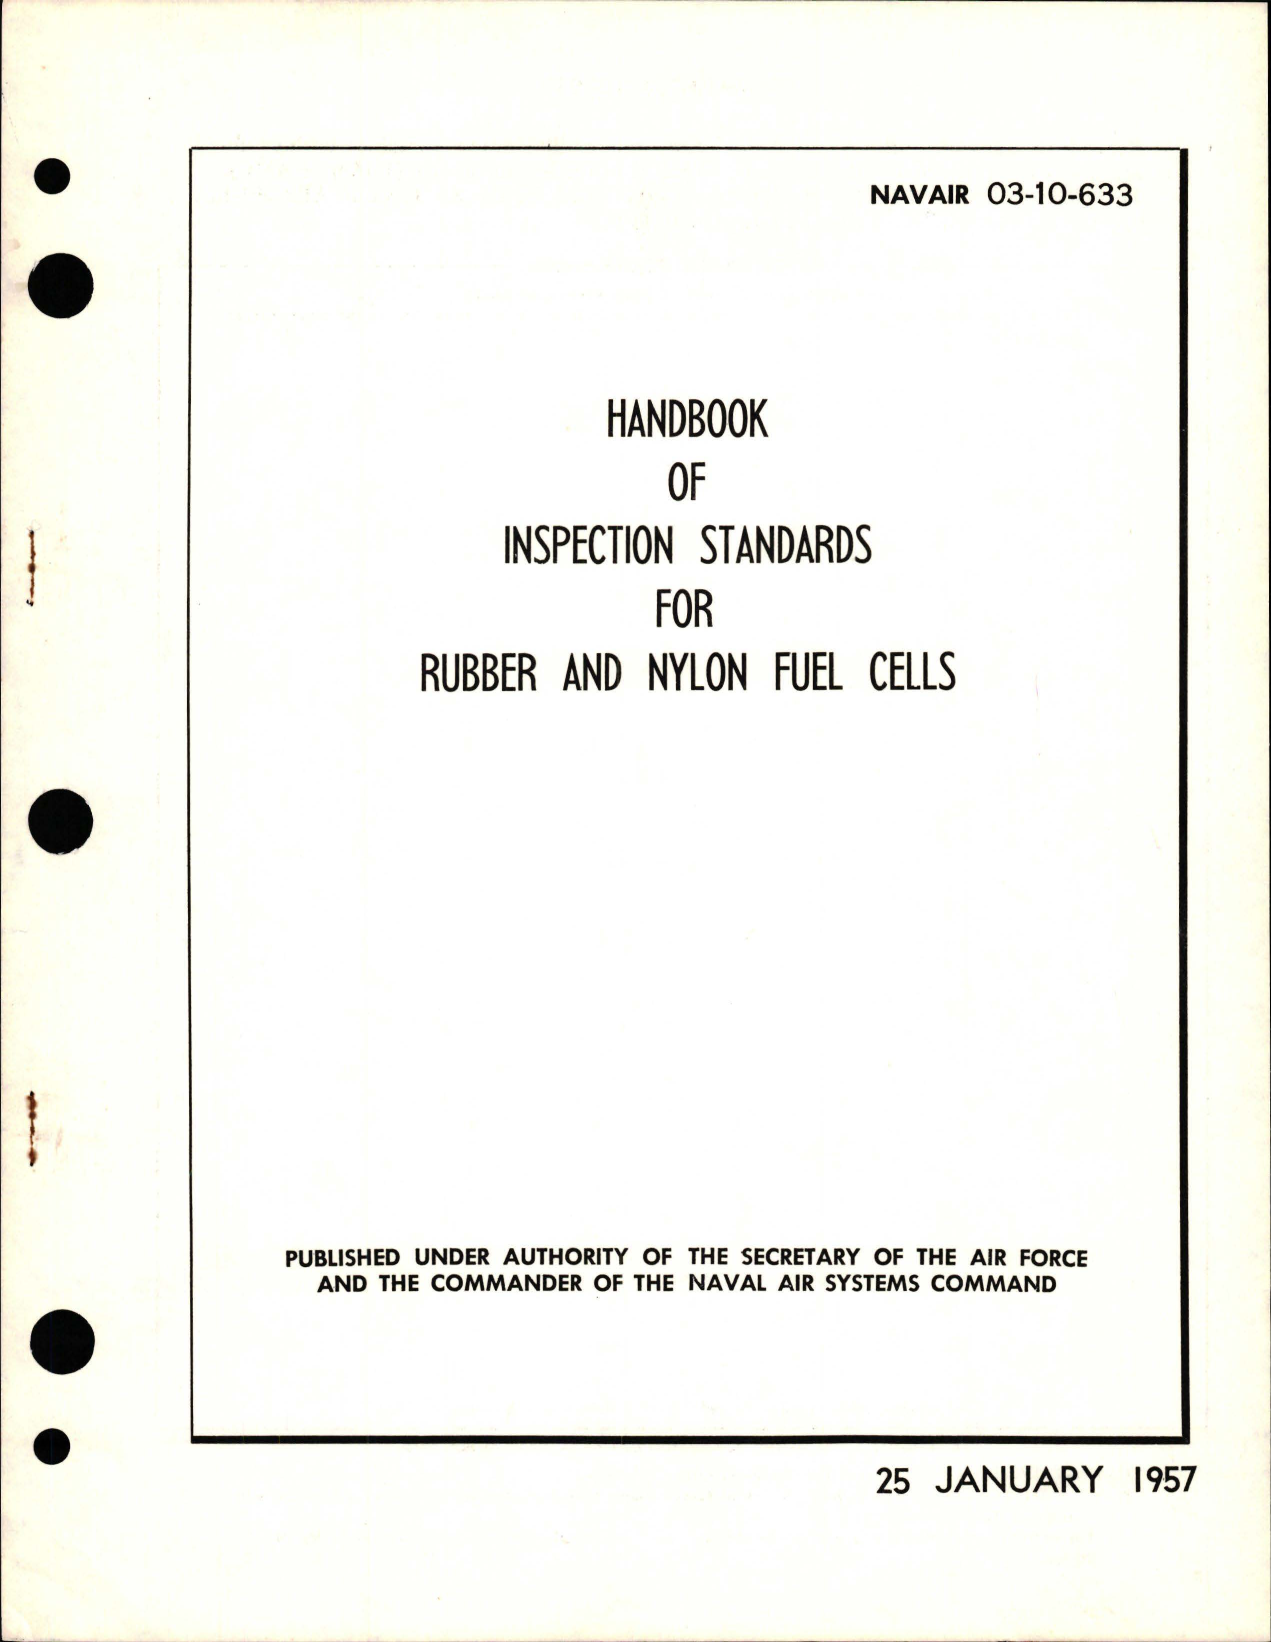 Sample page 1 from AirCorps Library document: Handbook of Inspection Standards for Rubber and Nylon Fuel Cells